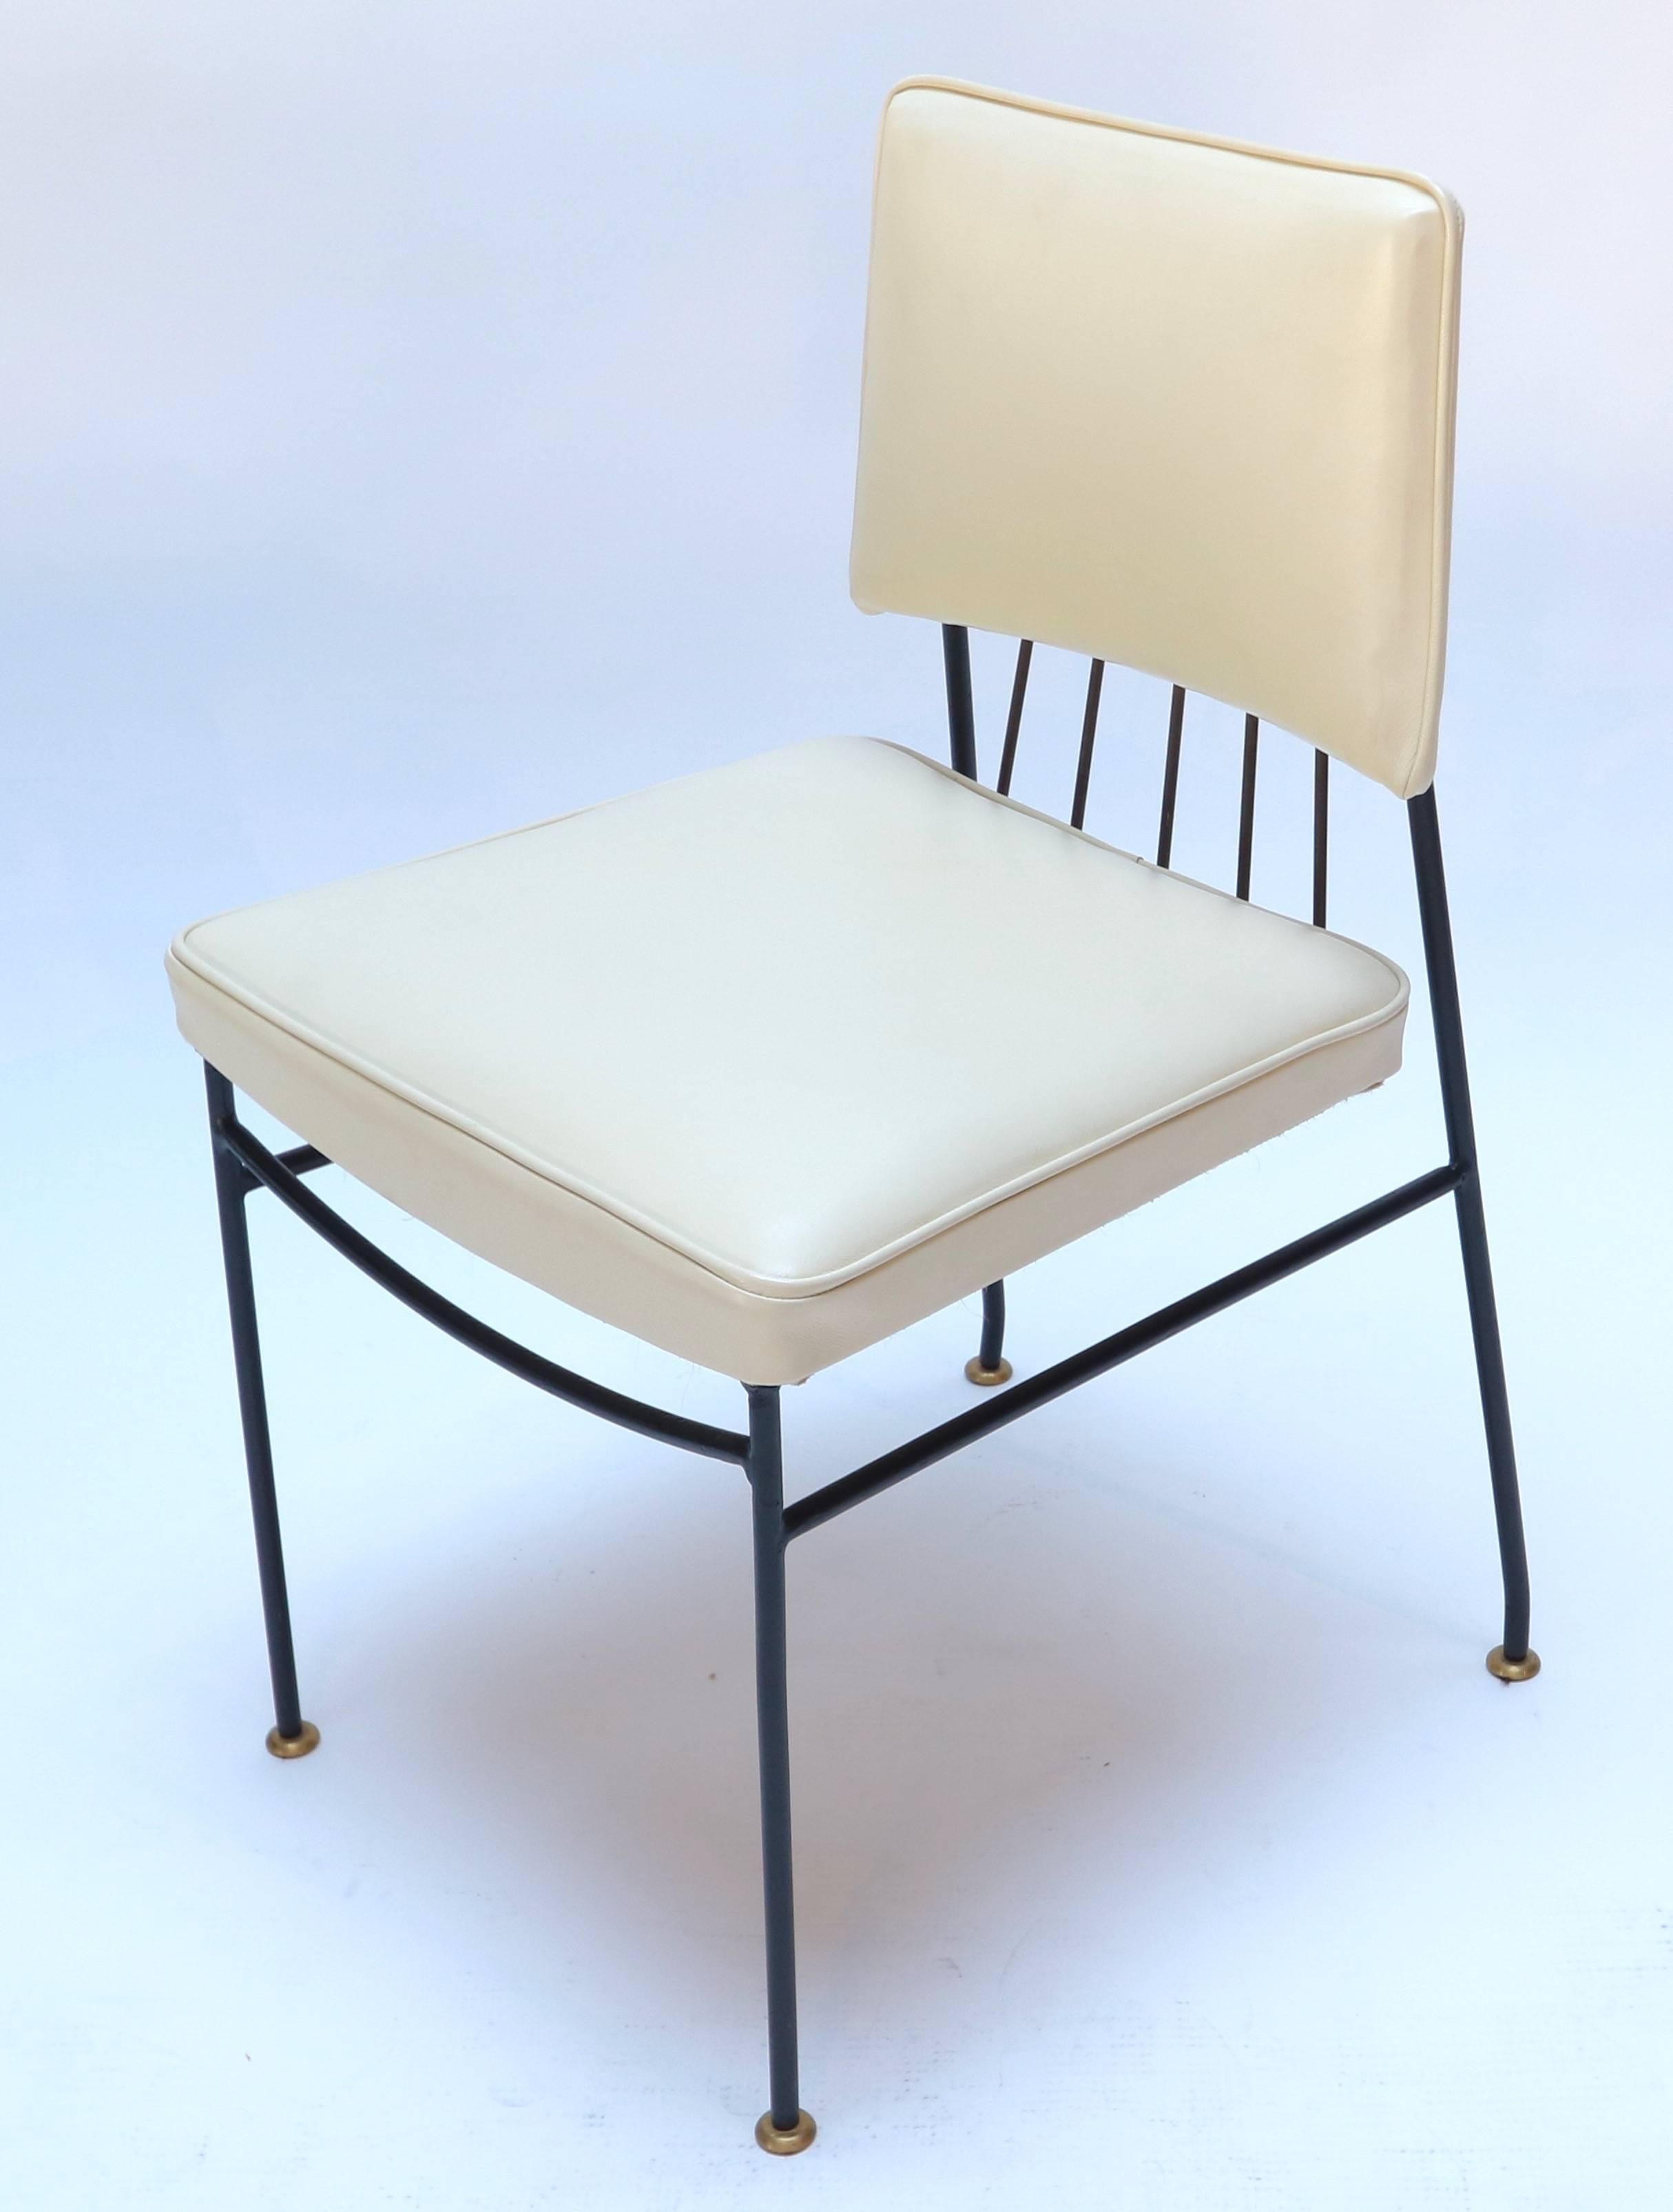 Set of four dining chairs by Arturo Pani from the 1960s upholstered in cream leather on a metal frame with brass back and feet.
Measure: seat depth 16